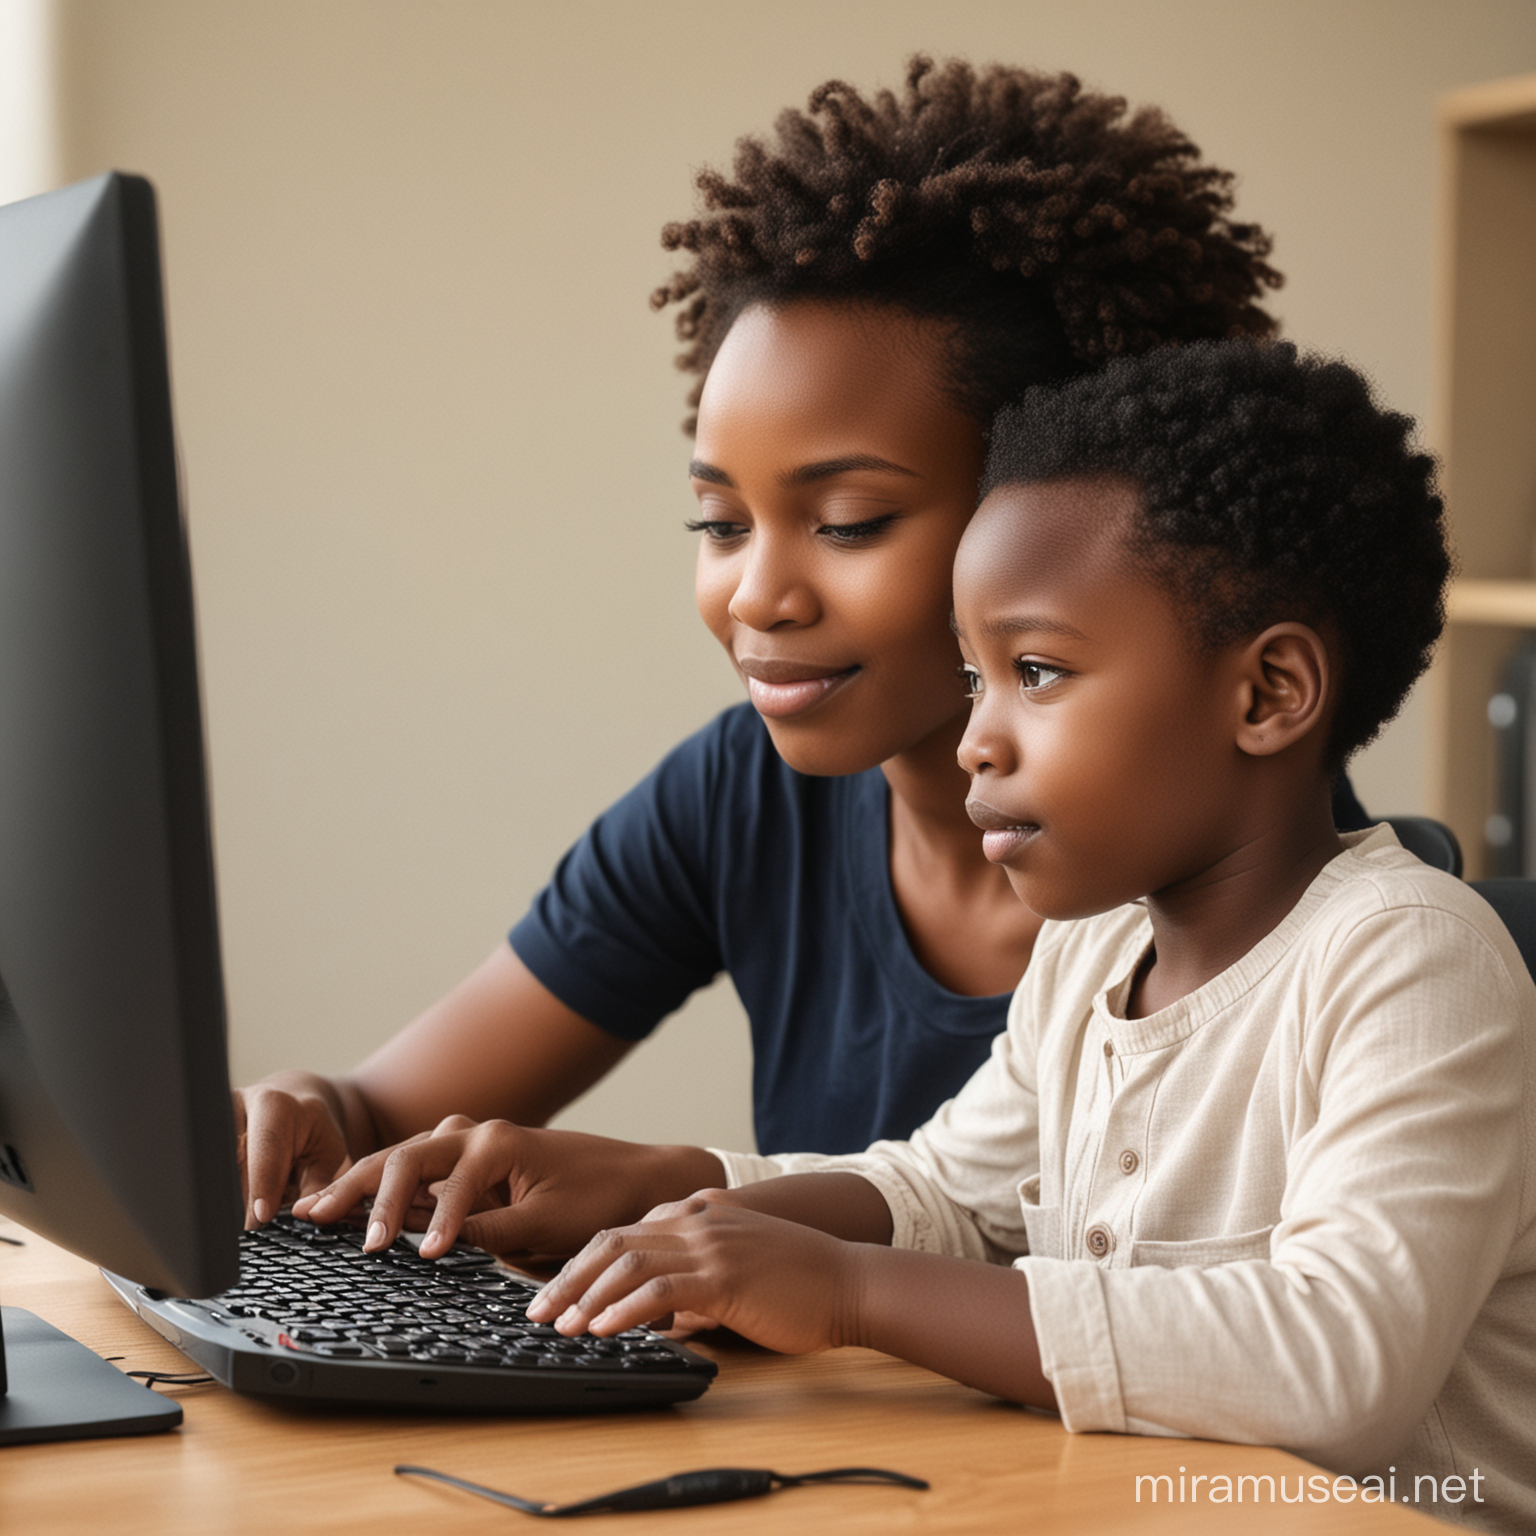 African Child Learning Computer Skills with Mothers Assistance